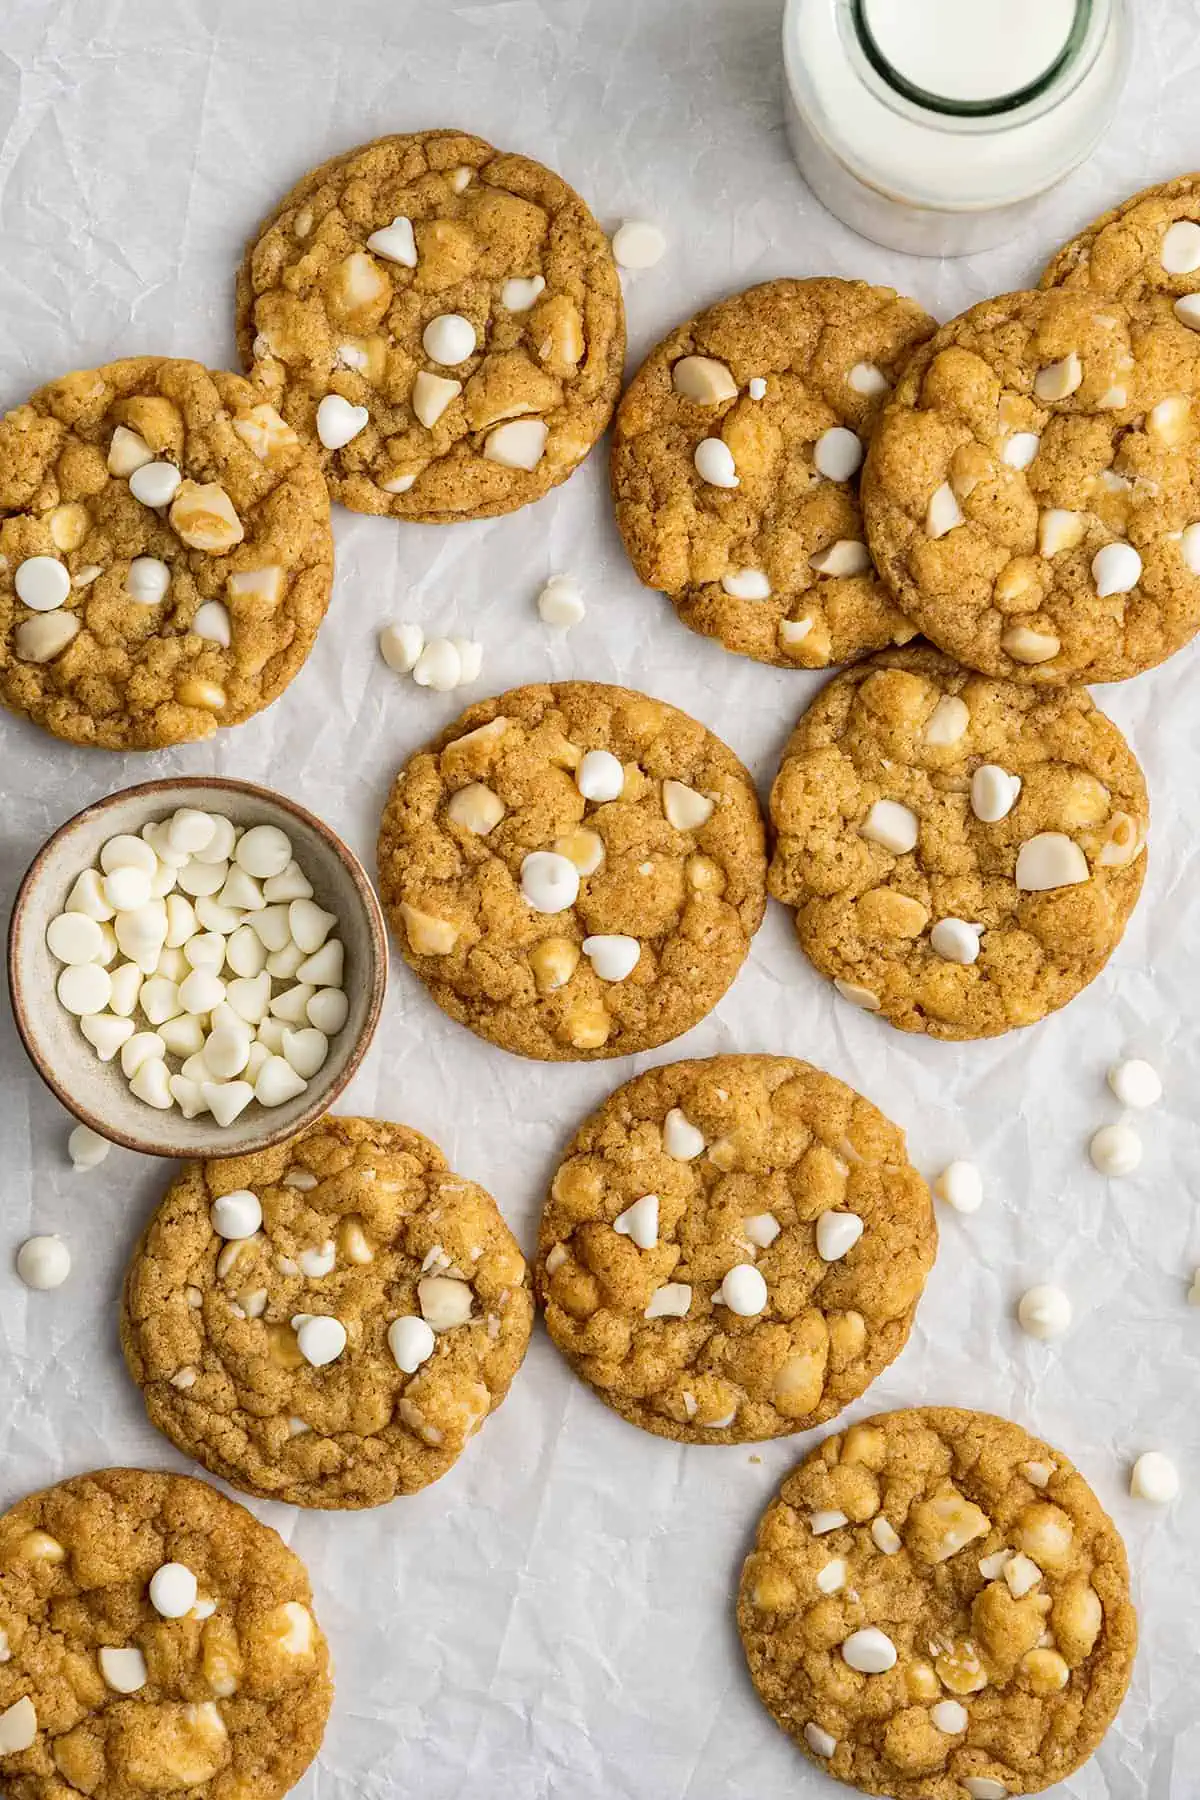 Overhead view of a bunch of white chocolate chip and macadamia nut cookies, with a jar of milk and a bowl of white chocolate chips